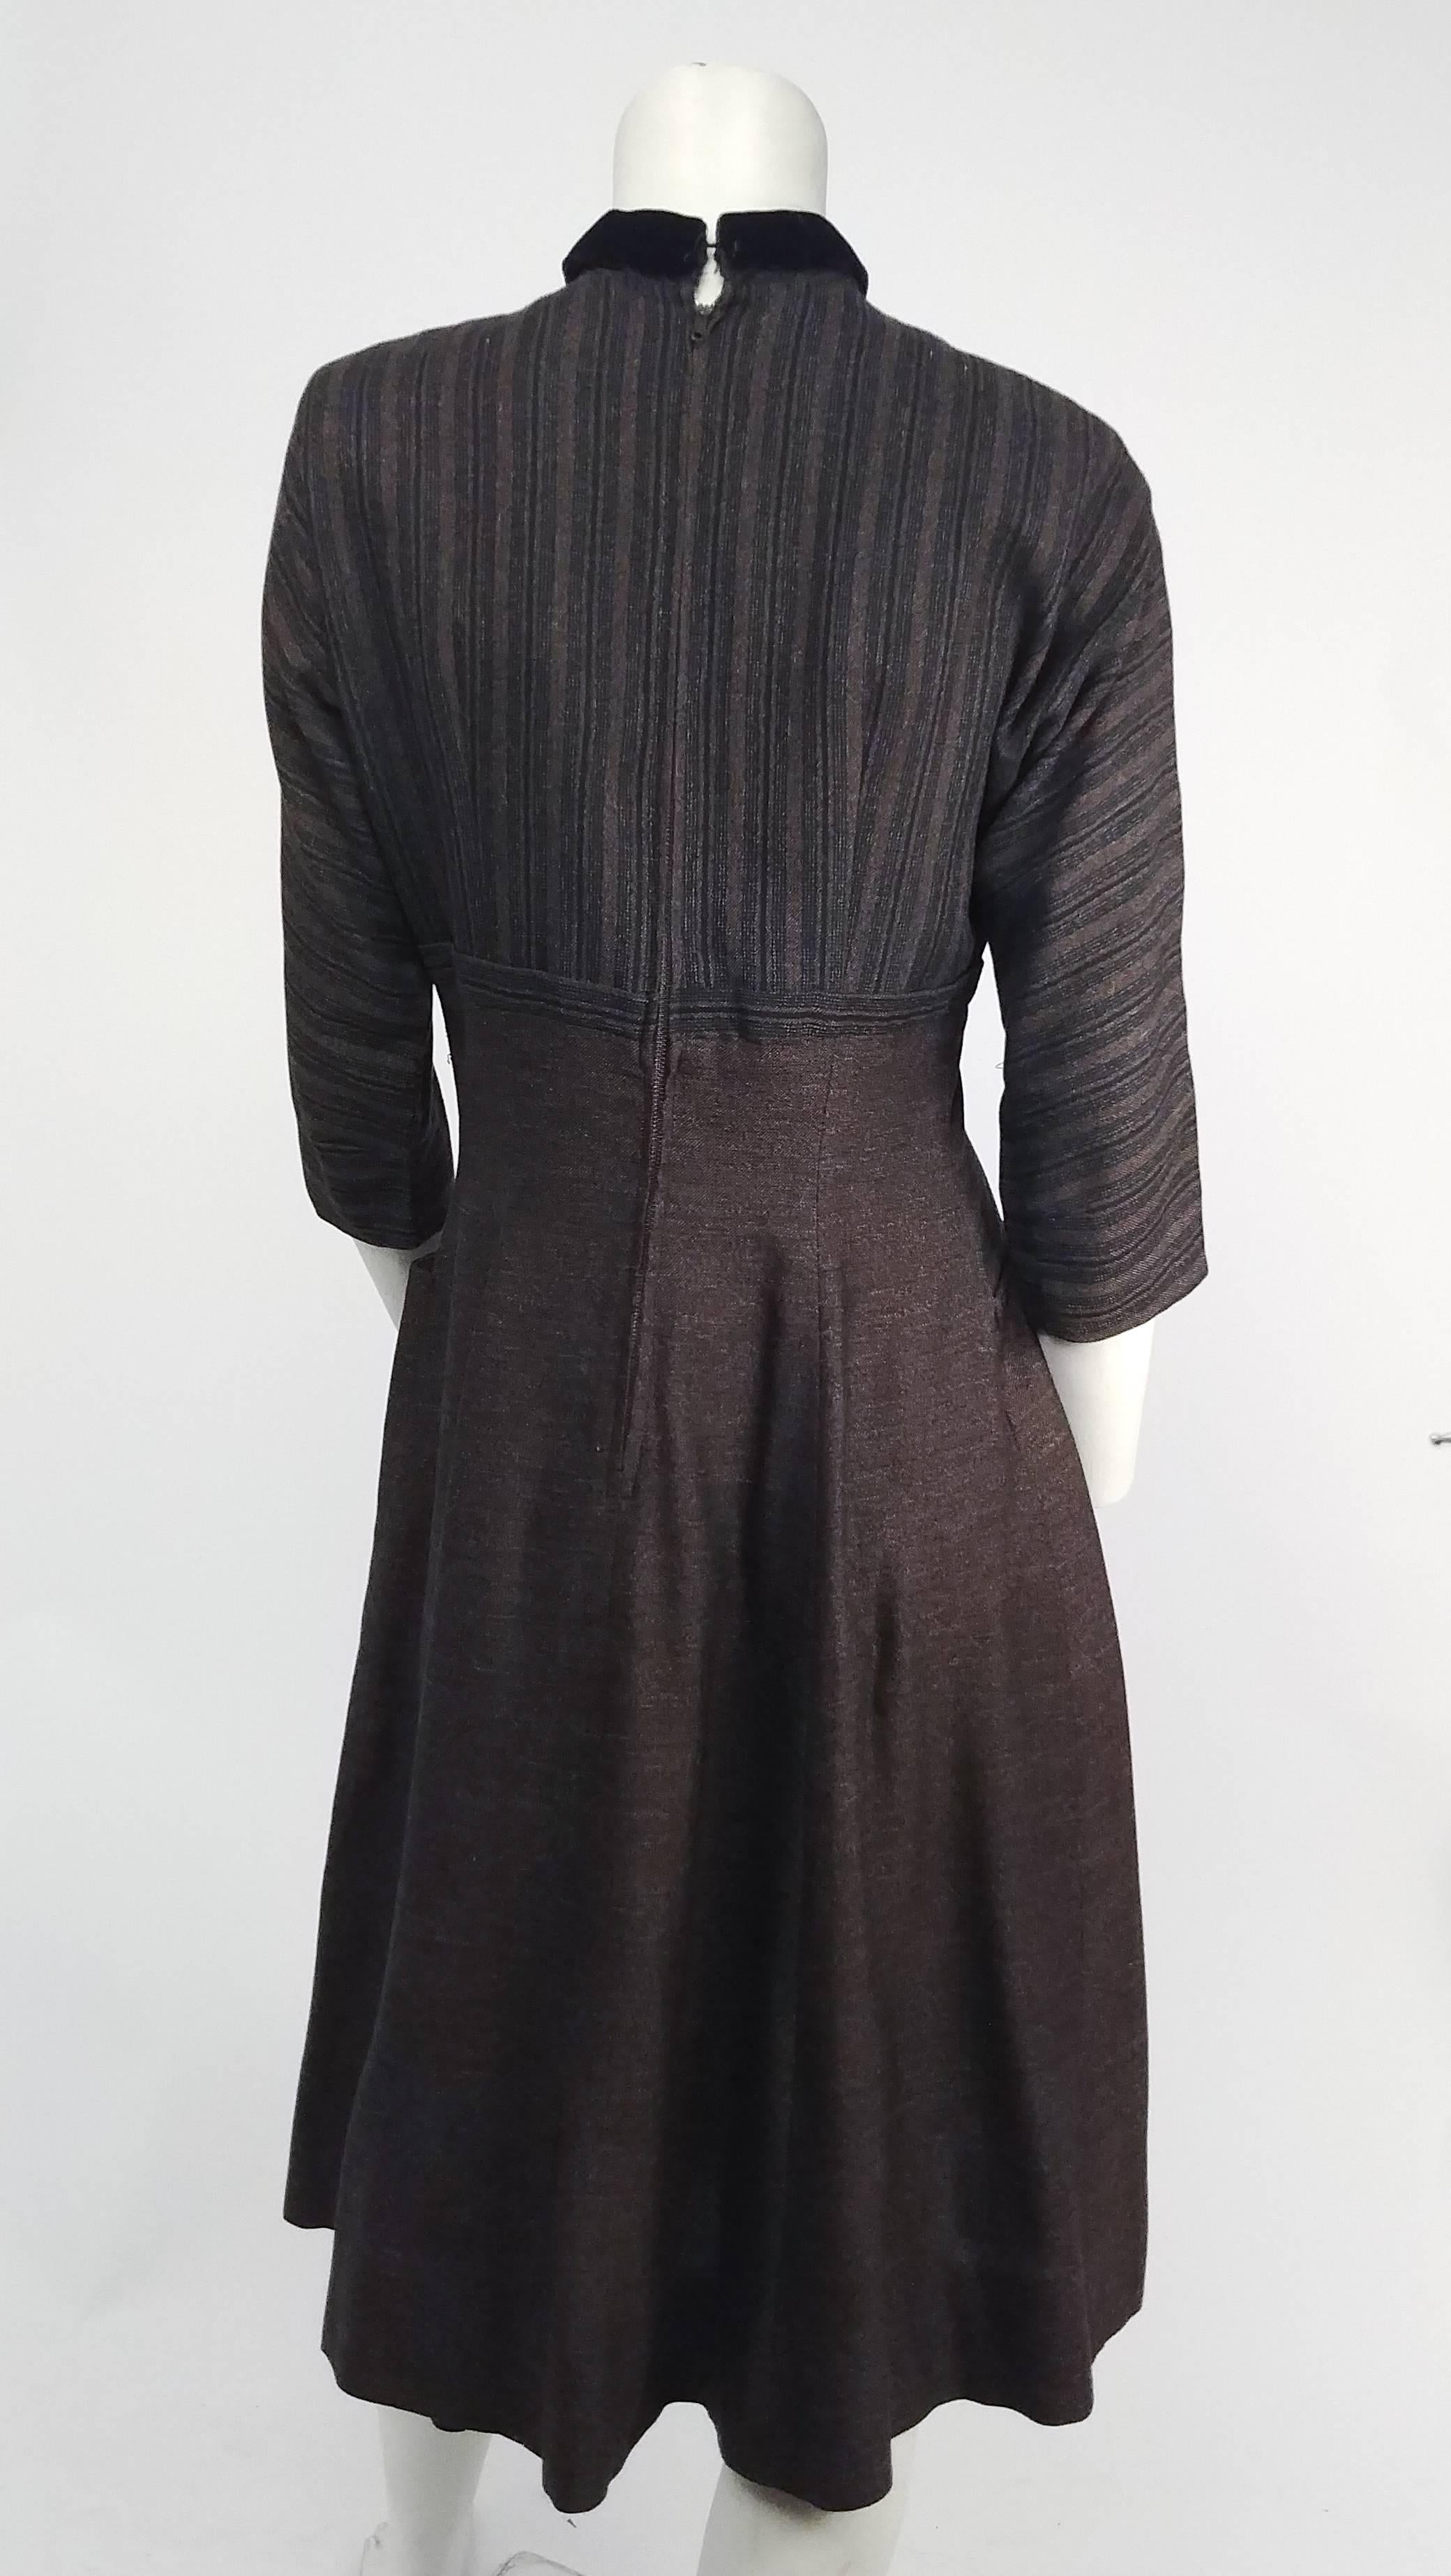 1940s Day Dress with Novelty Button Trim In Good Condition For Sale In San Francisco, CA